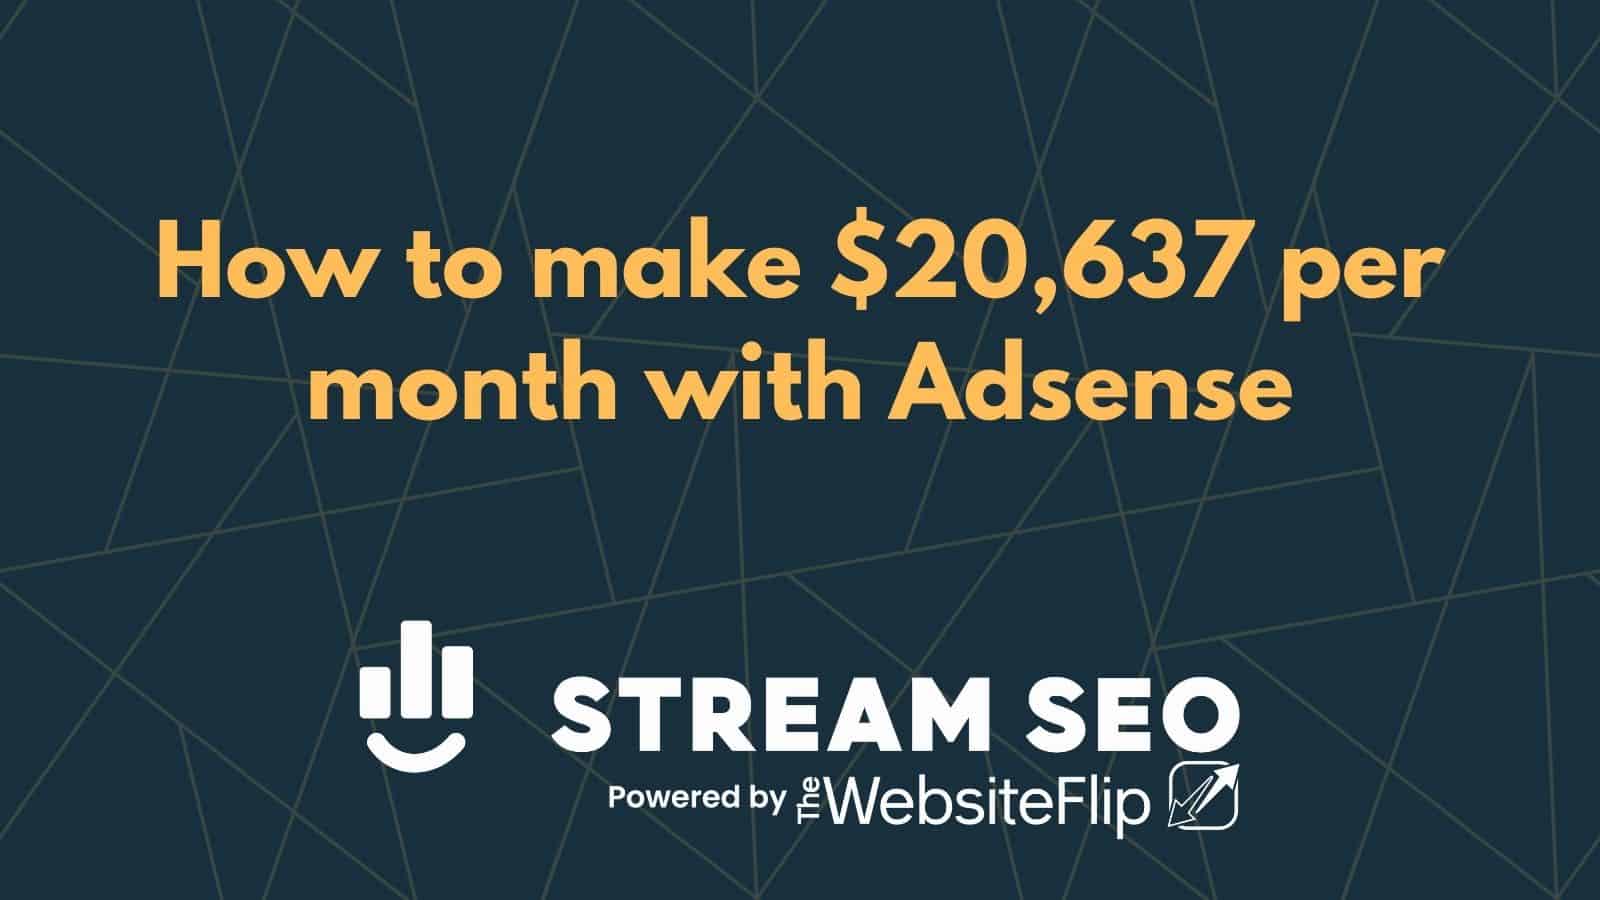 How to make $20,637 per month with Adsense